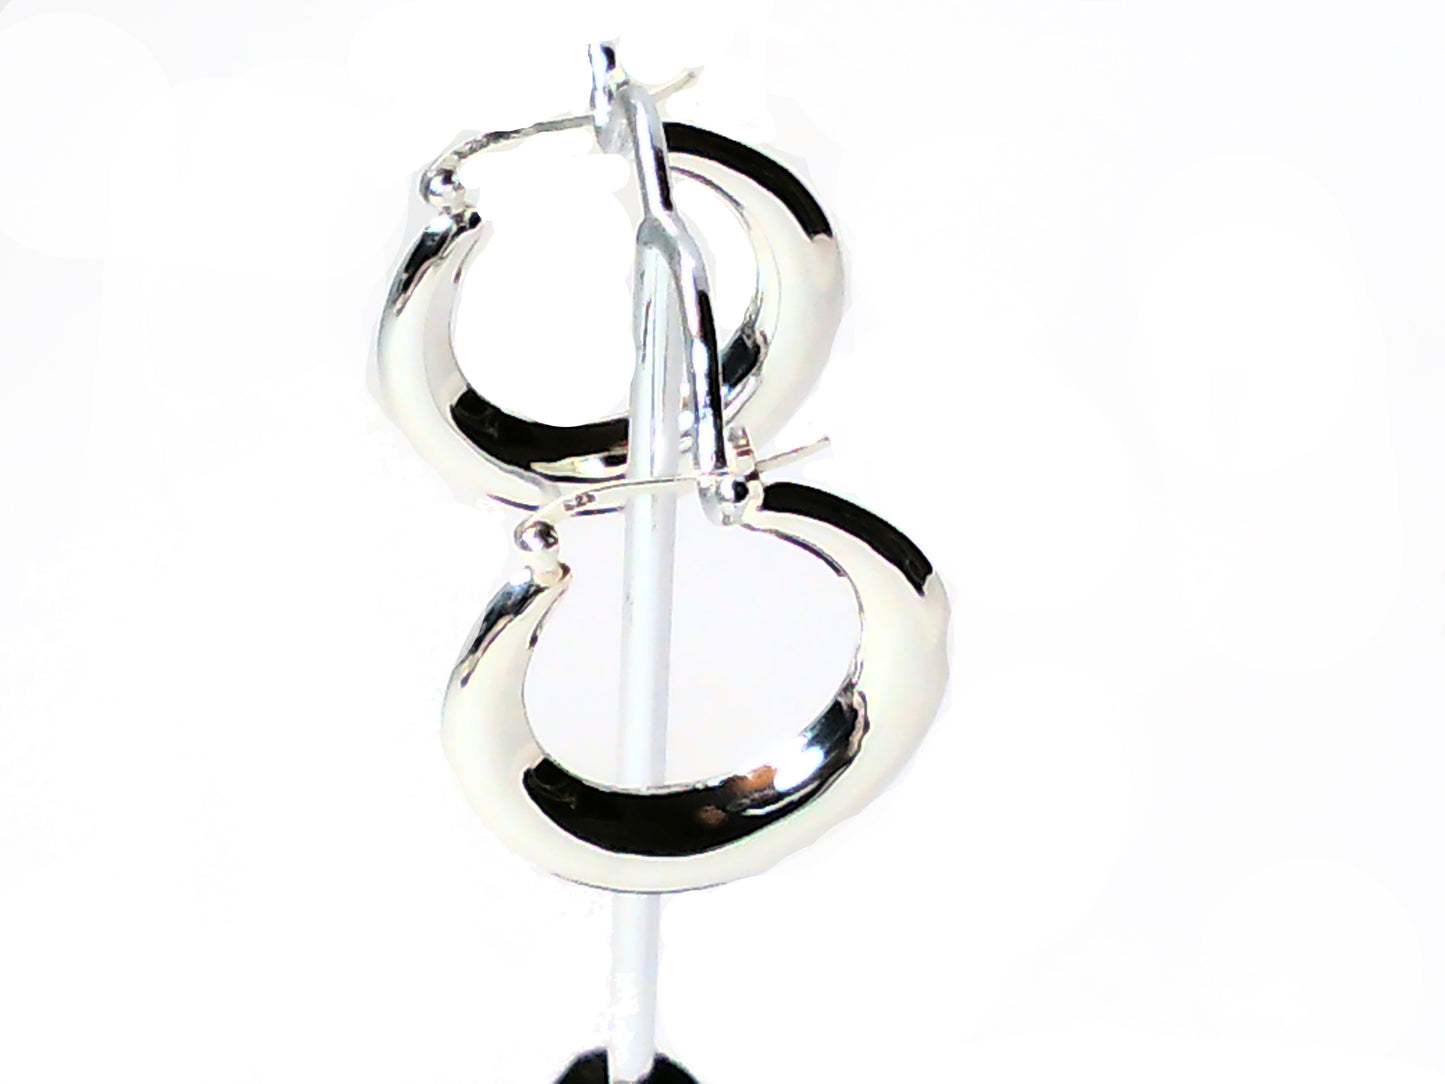 30mm Sterling Silver Hoop Earrings With French Locks - Providence silver gold jewelry usa